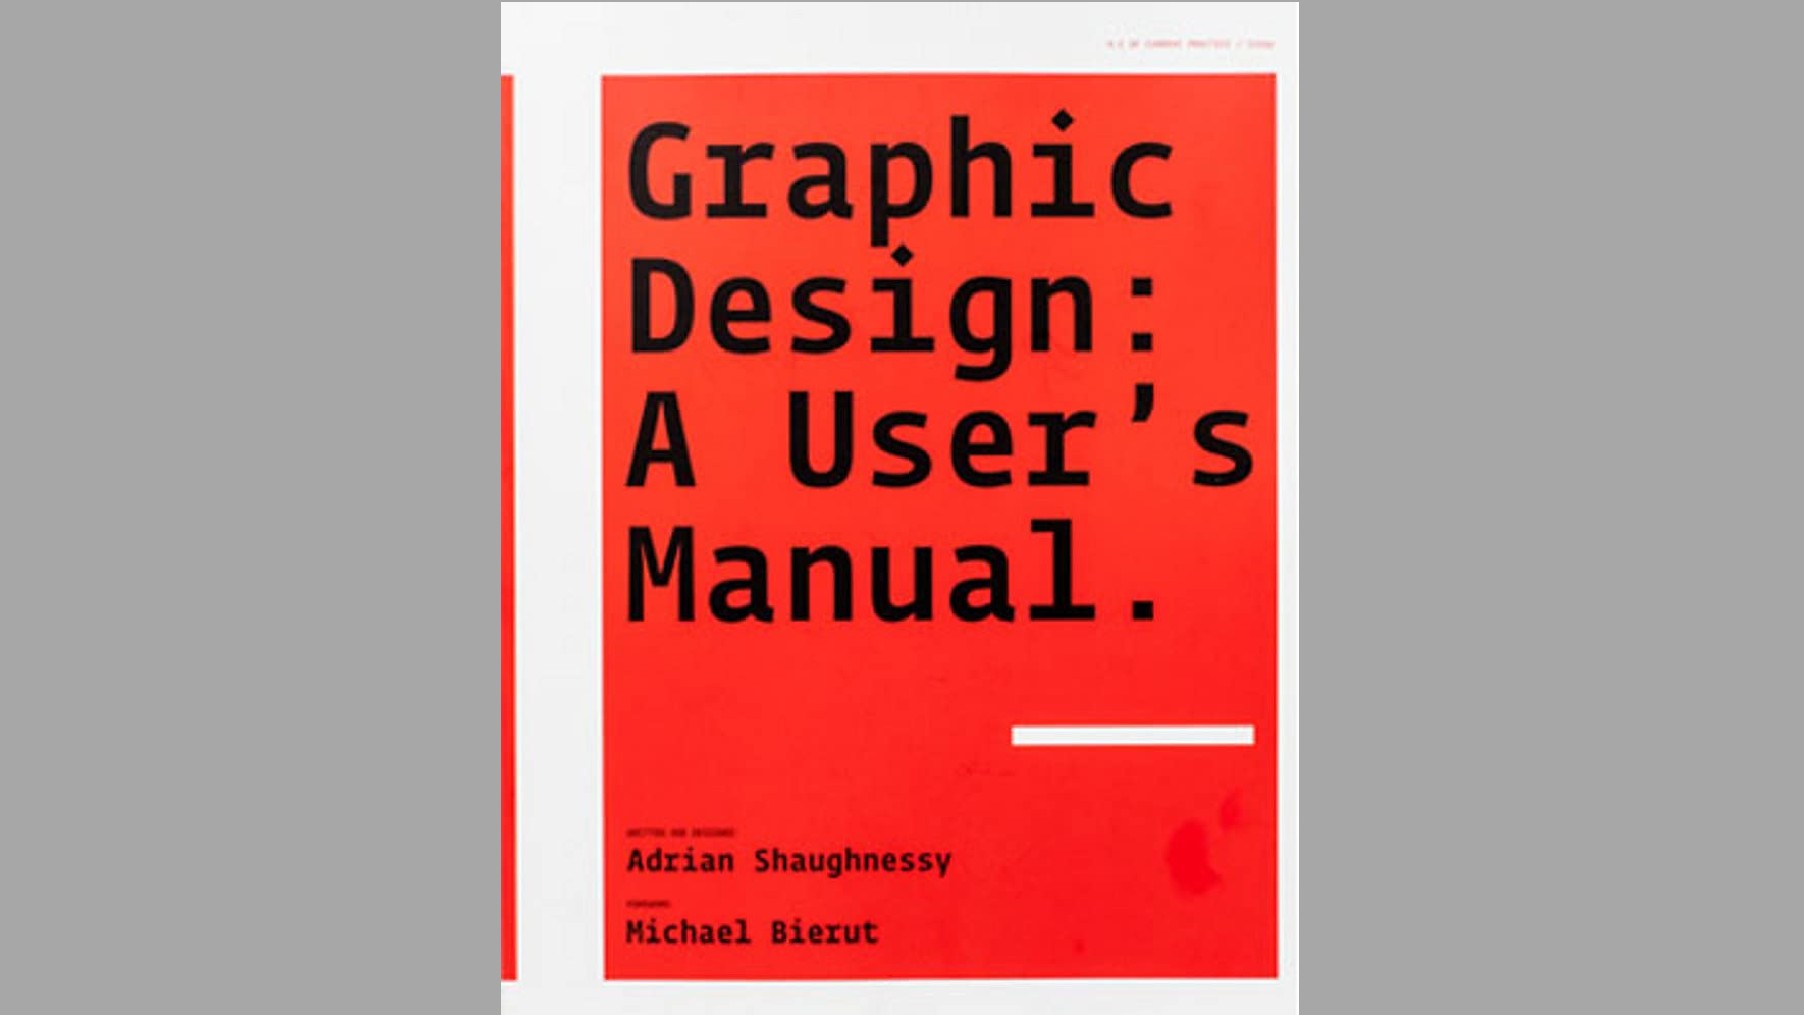 Cover shot of one of the best graphic design books, A User's Manual